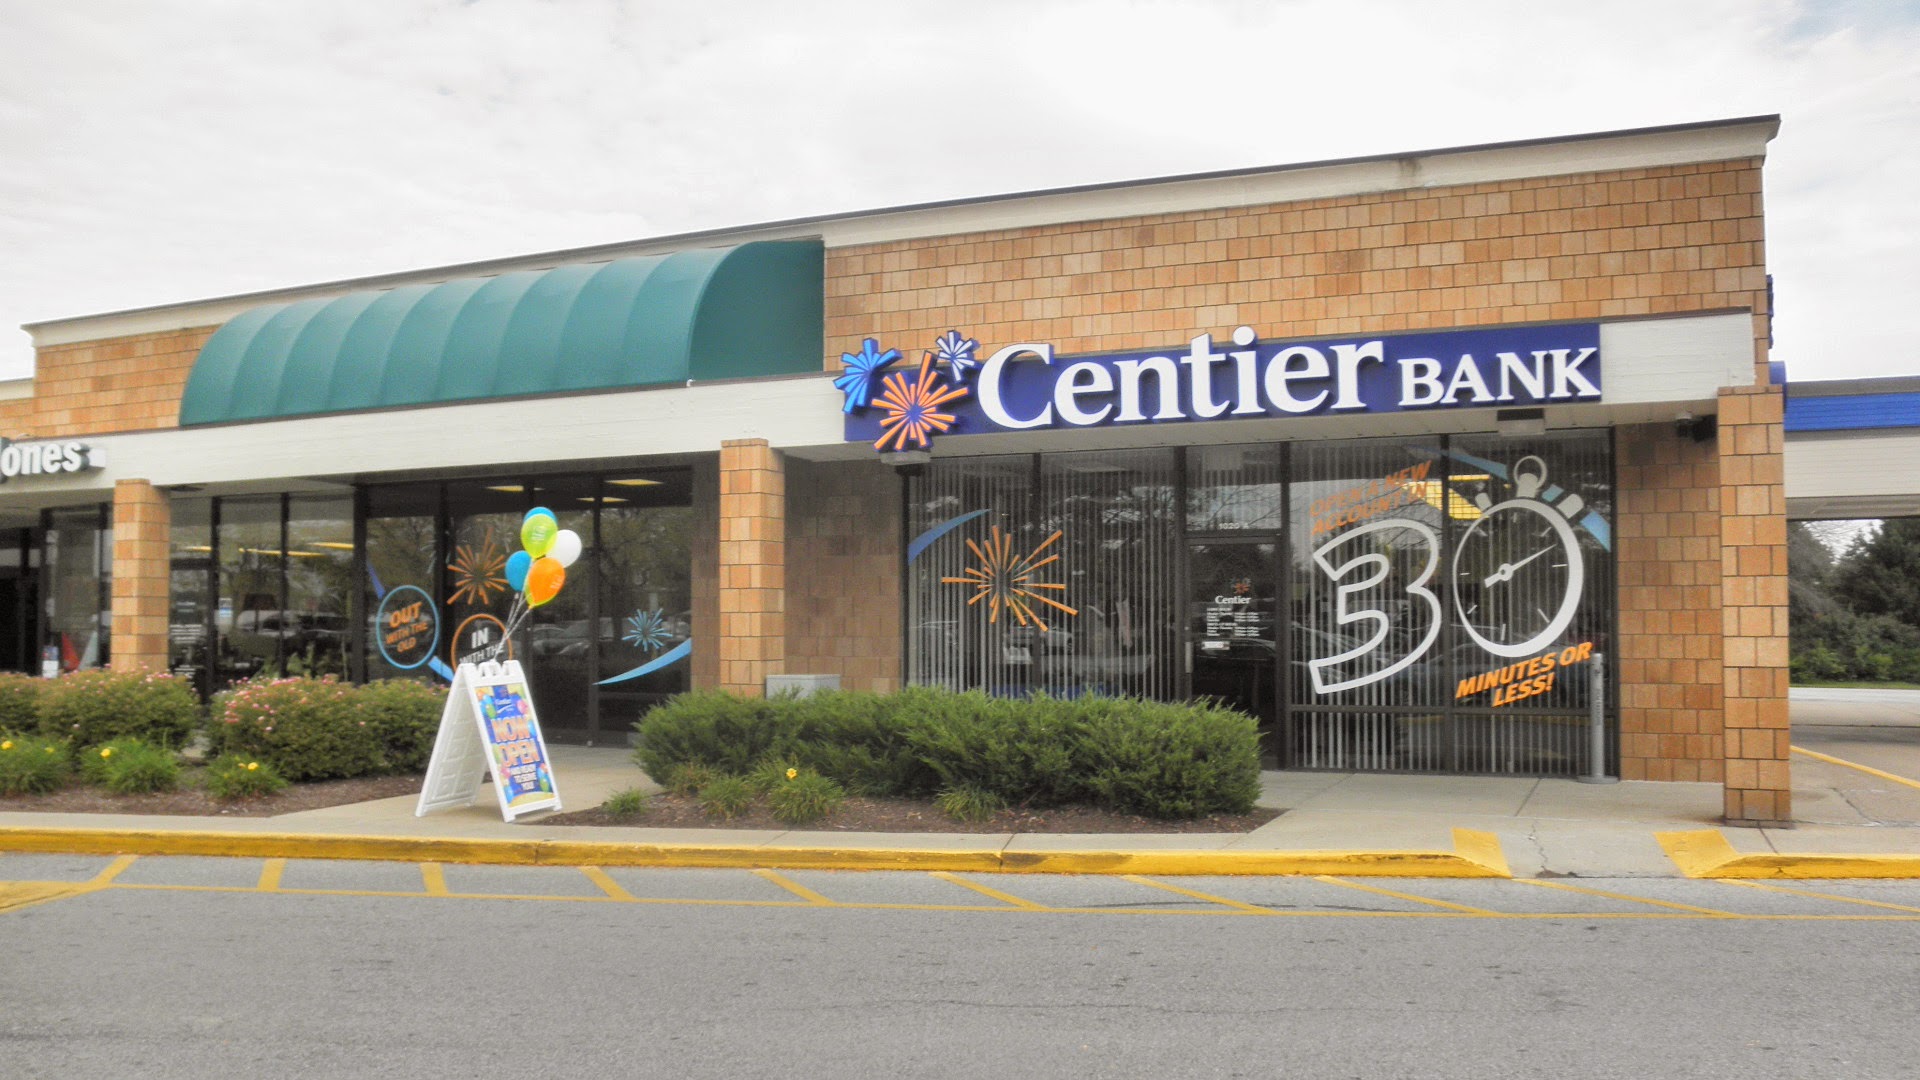 Centier Bank